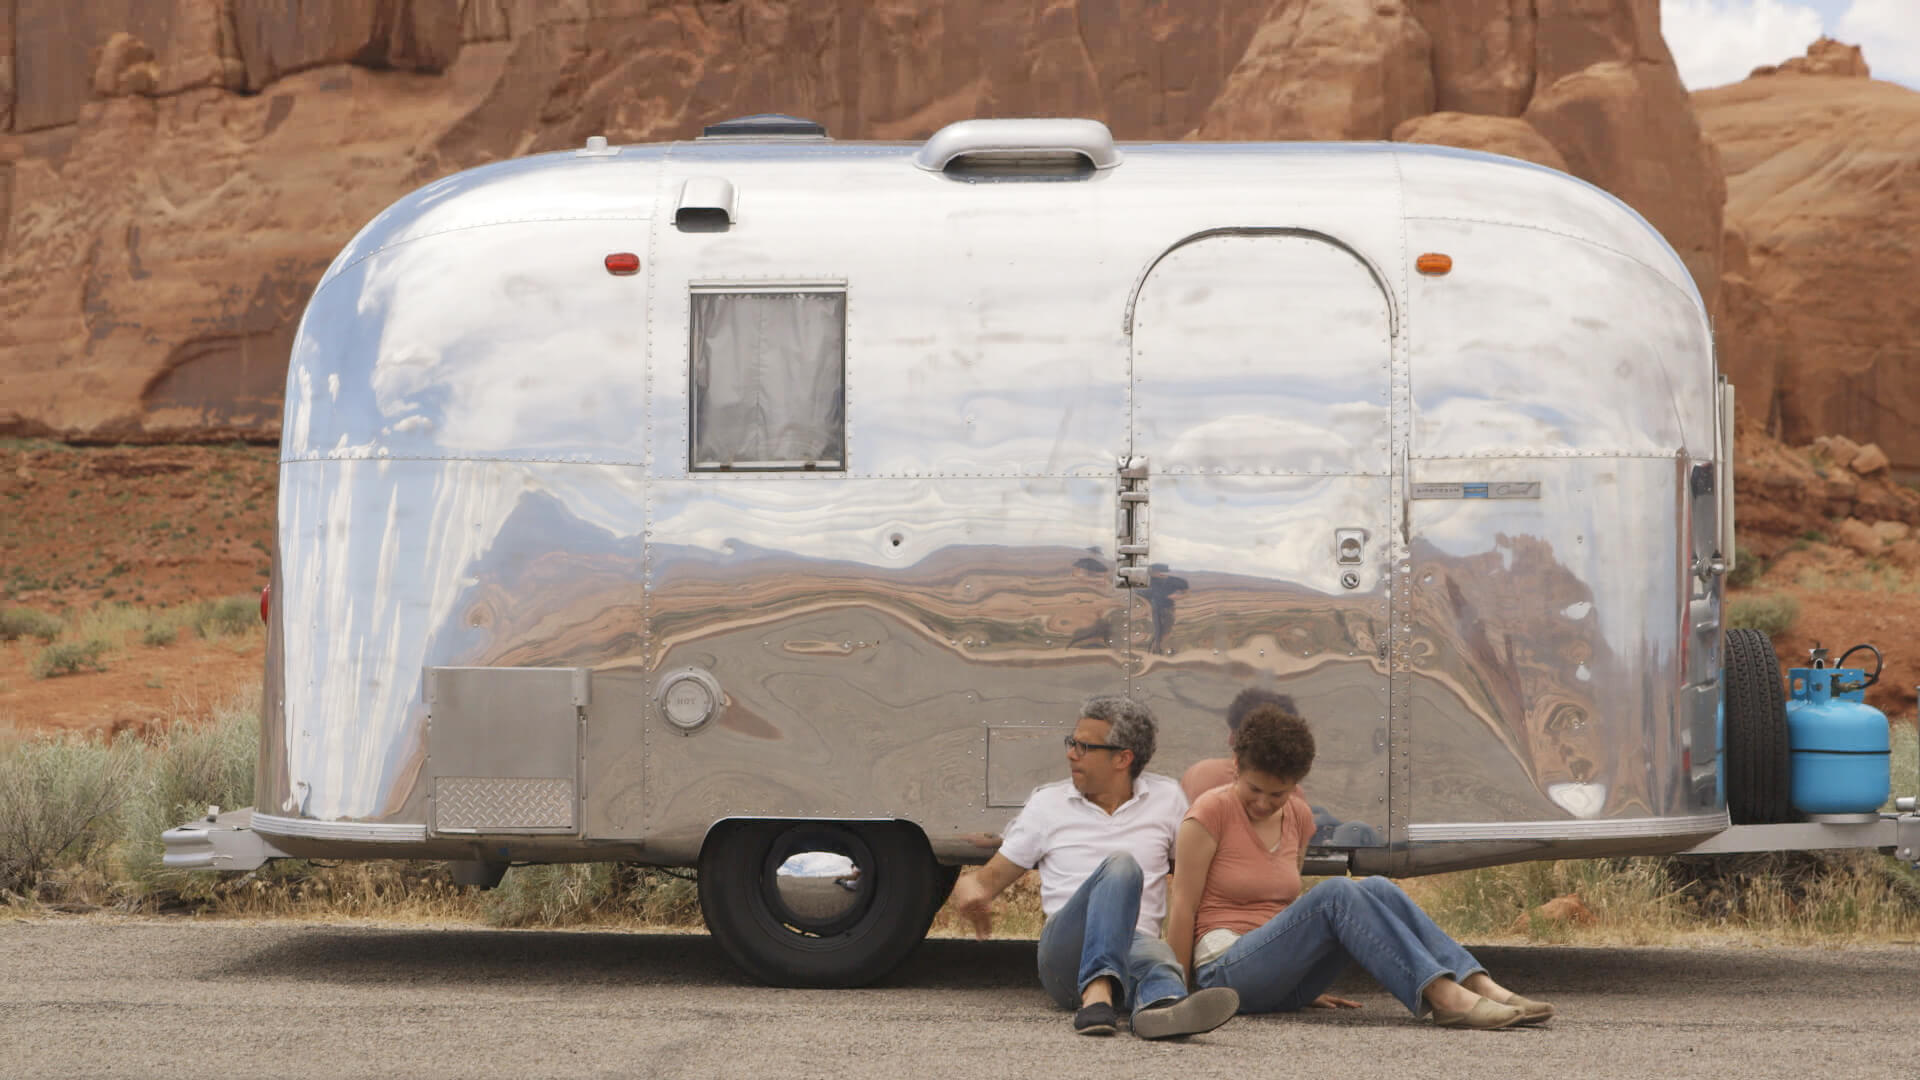 Still from Unrest. A man and a woman sitting on the ground in front of a small, silver airstream trailer. The background is the mountains of a red, sandy desert.